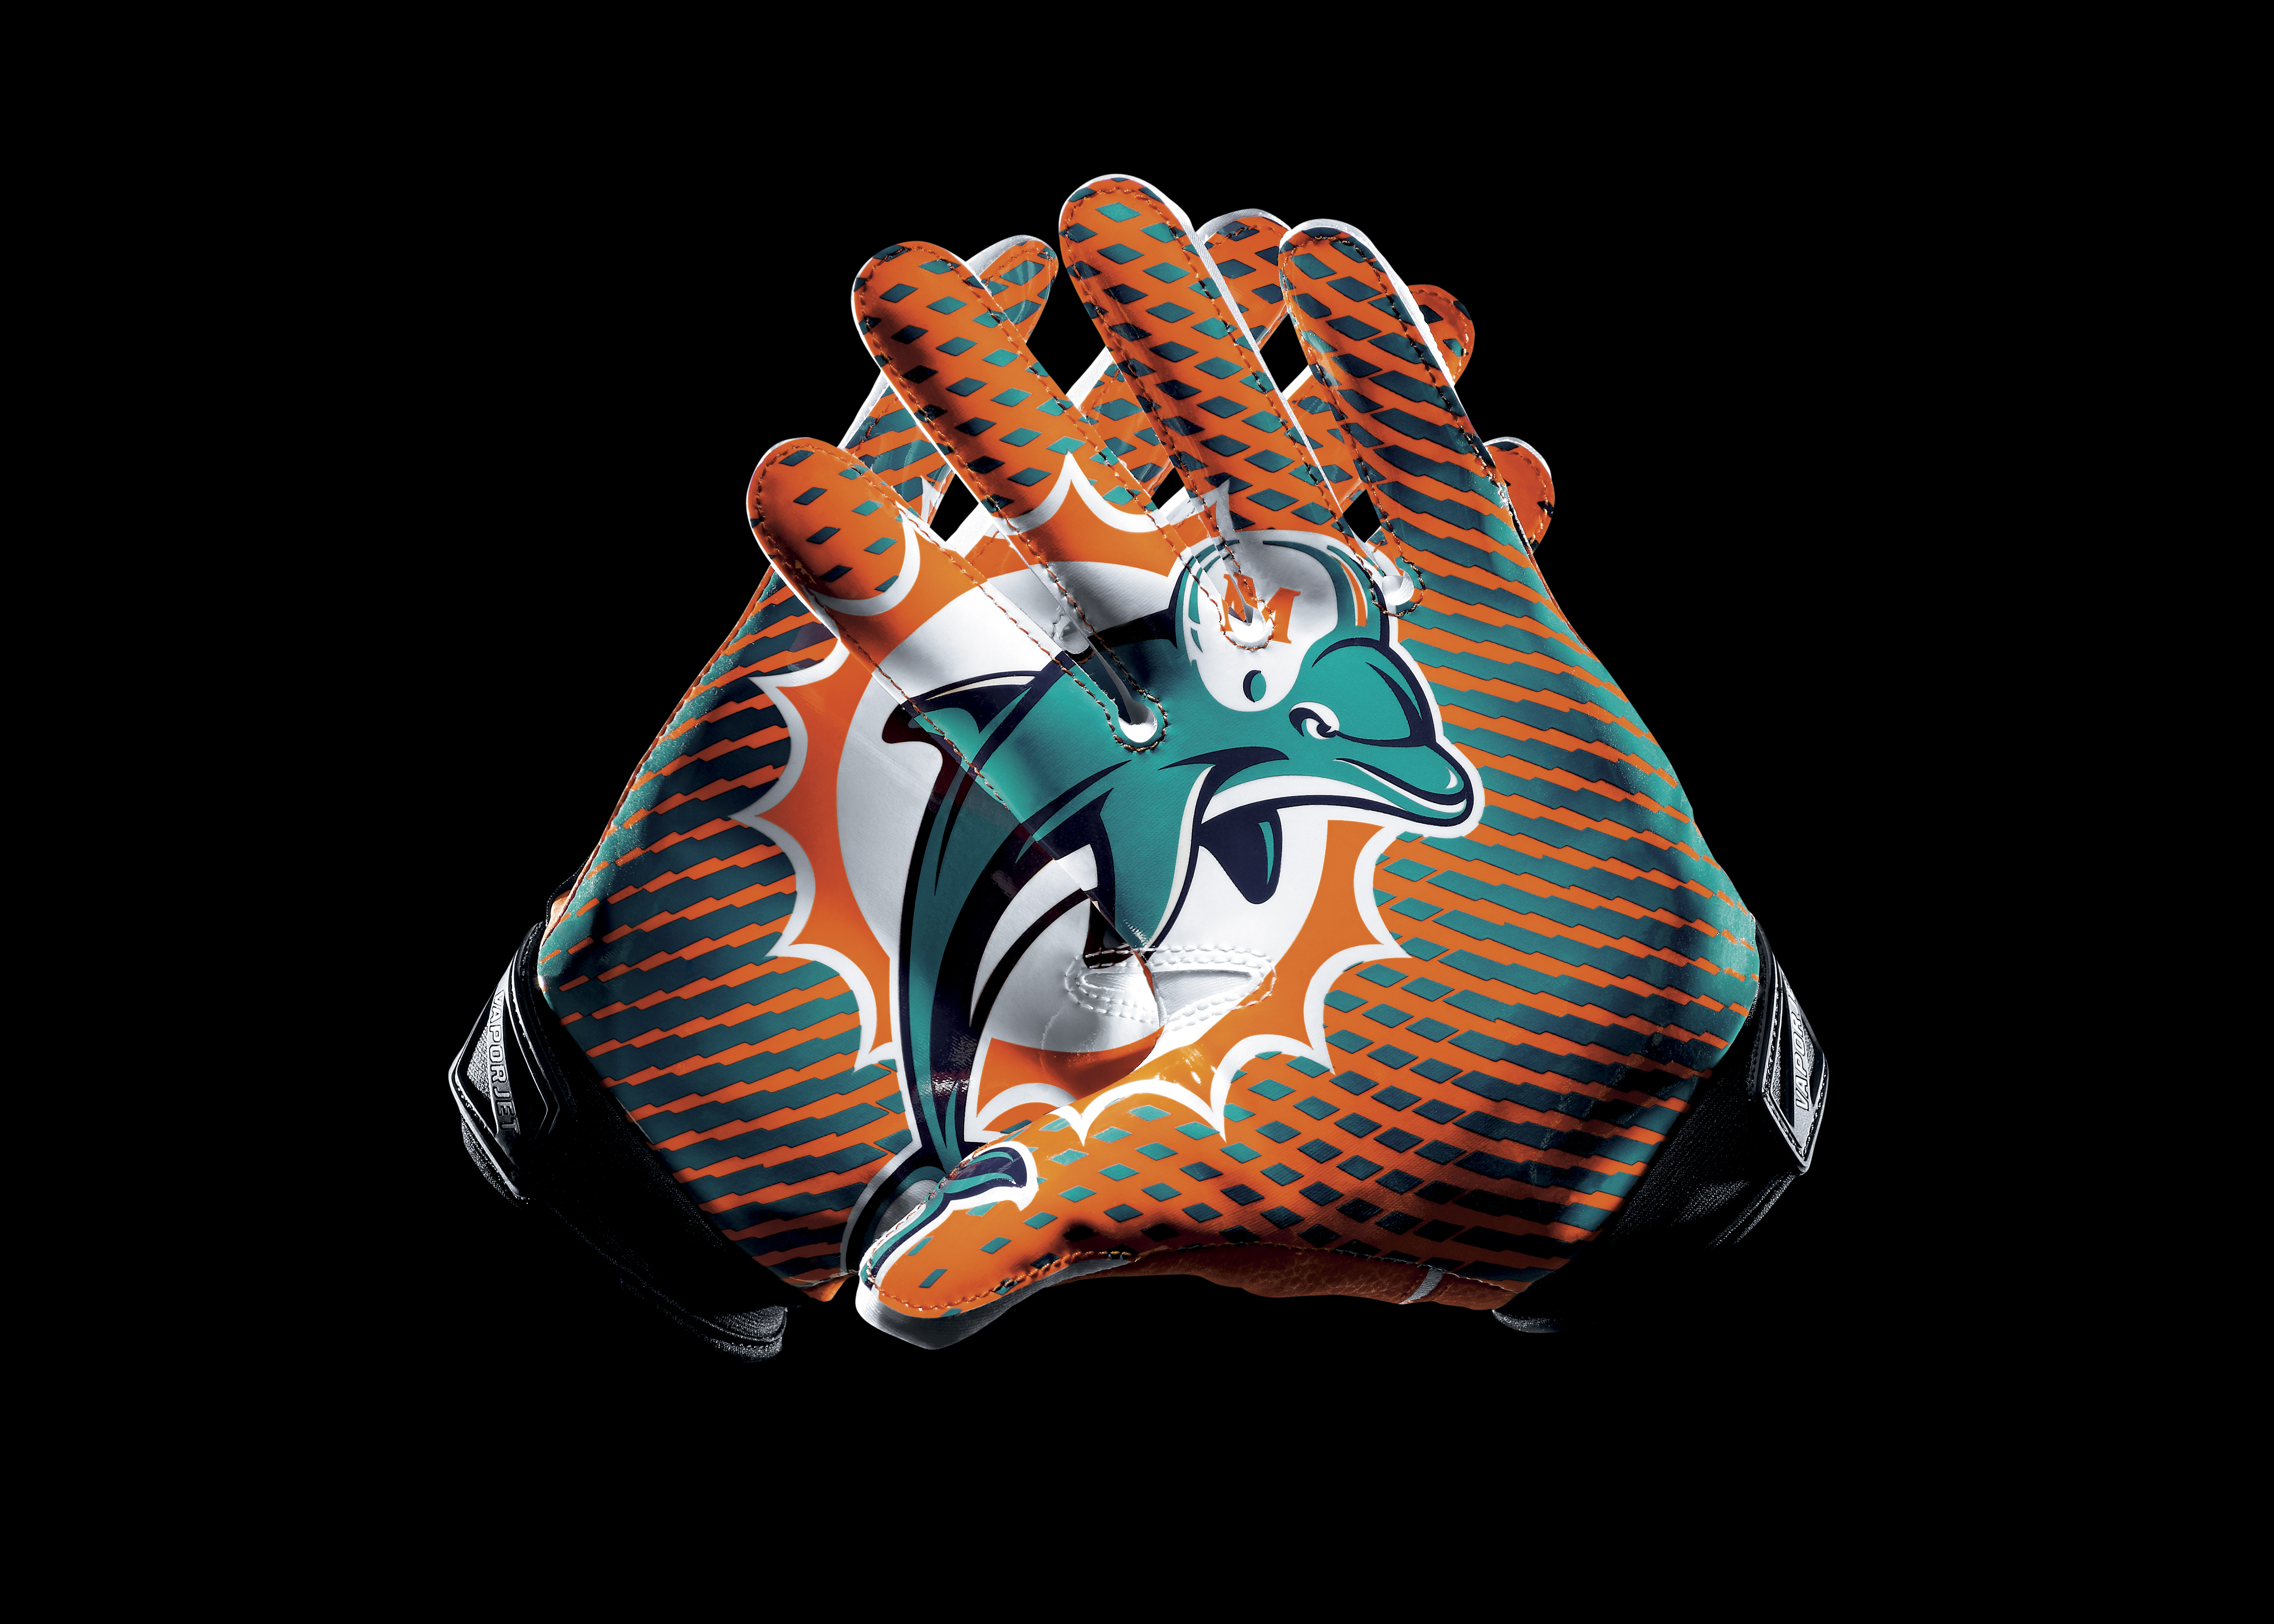 Miami Dolphins Logo Wallpapers  Top 28 Best Miami Dolphins Logo Wallpapers   HQ 